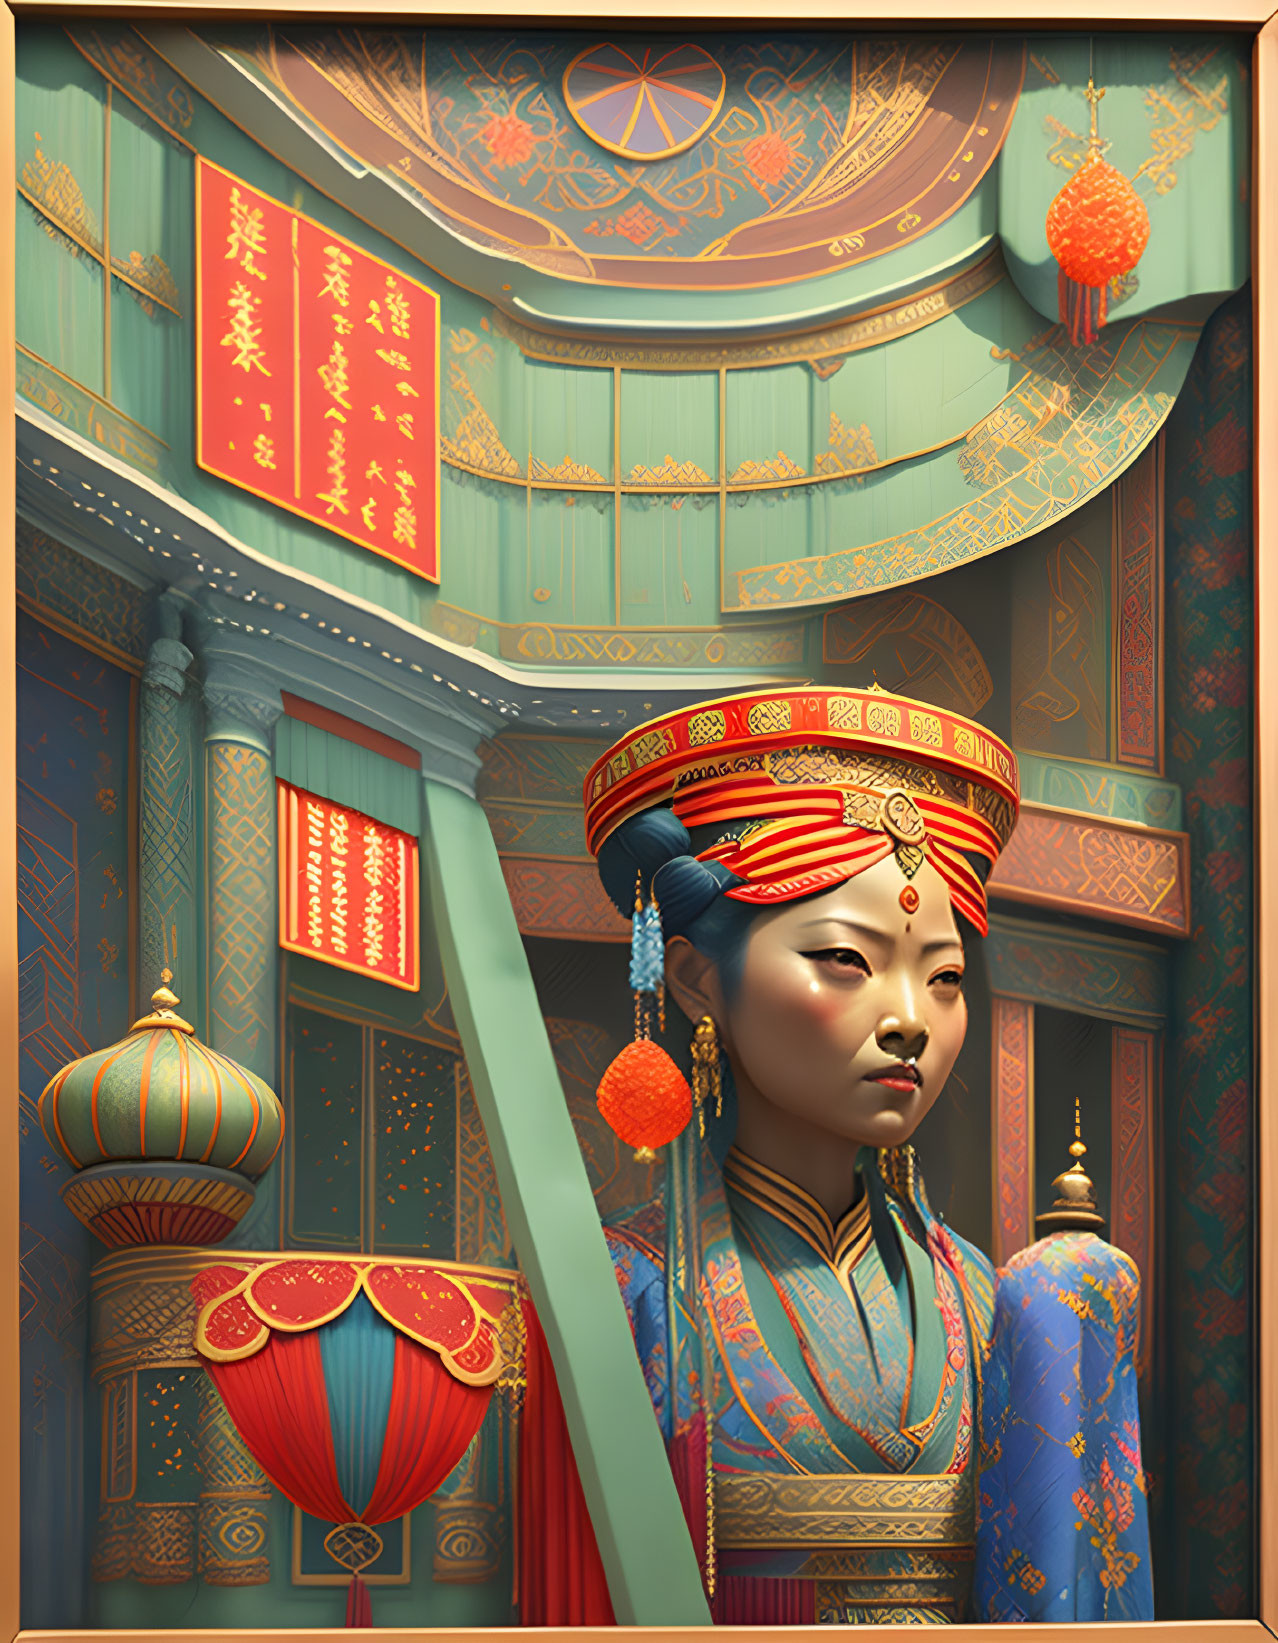 Regal woman in traditional East Asian attire with intricate patterns and red tassel accessories in palace interior.